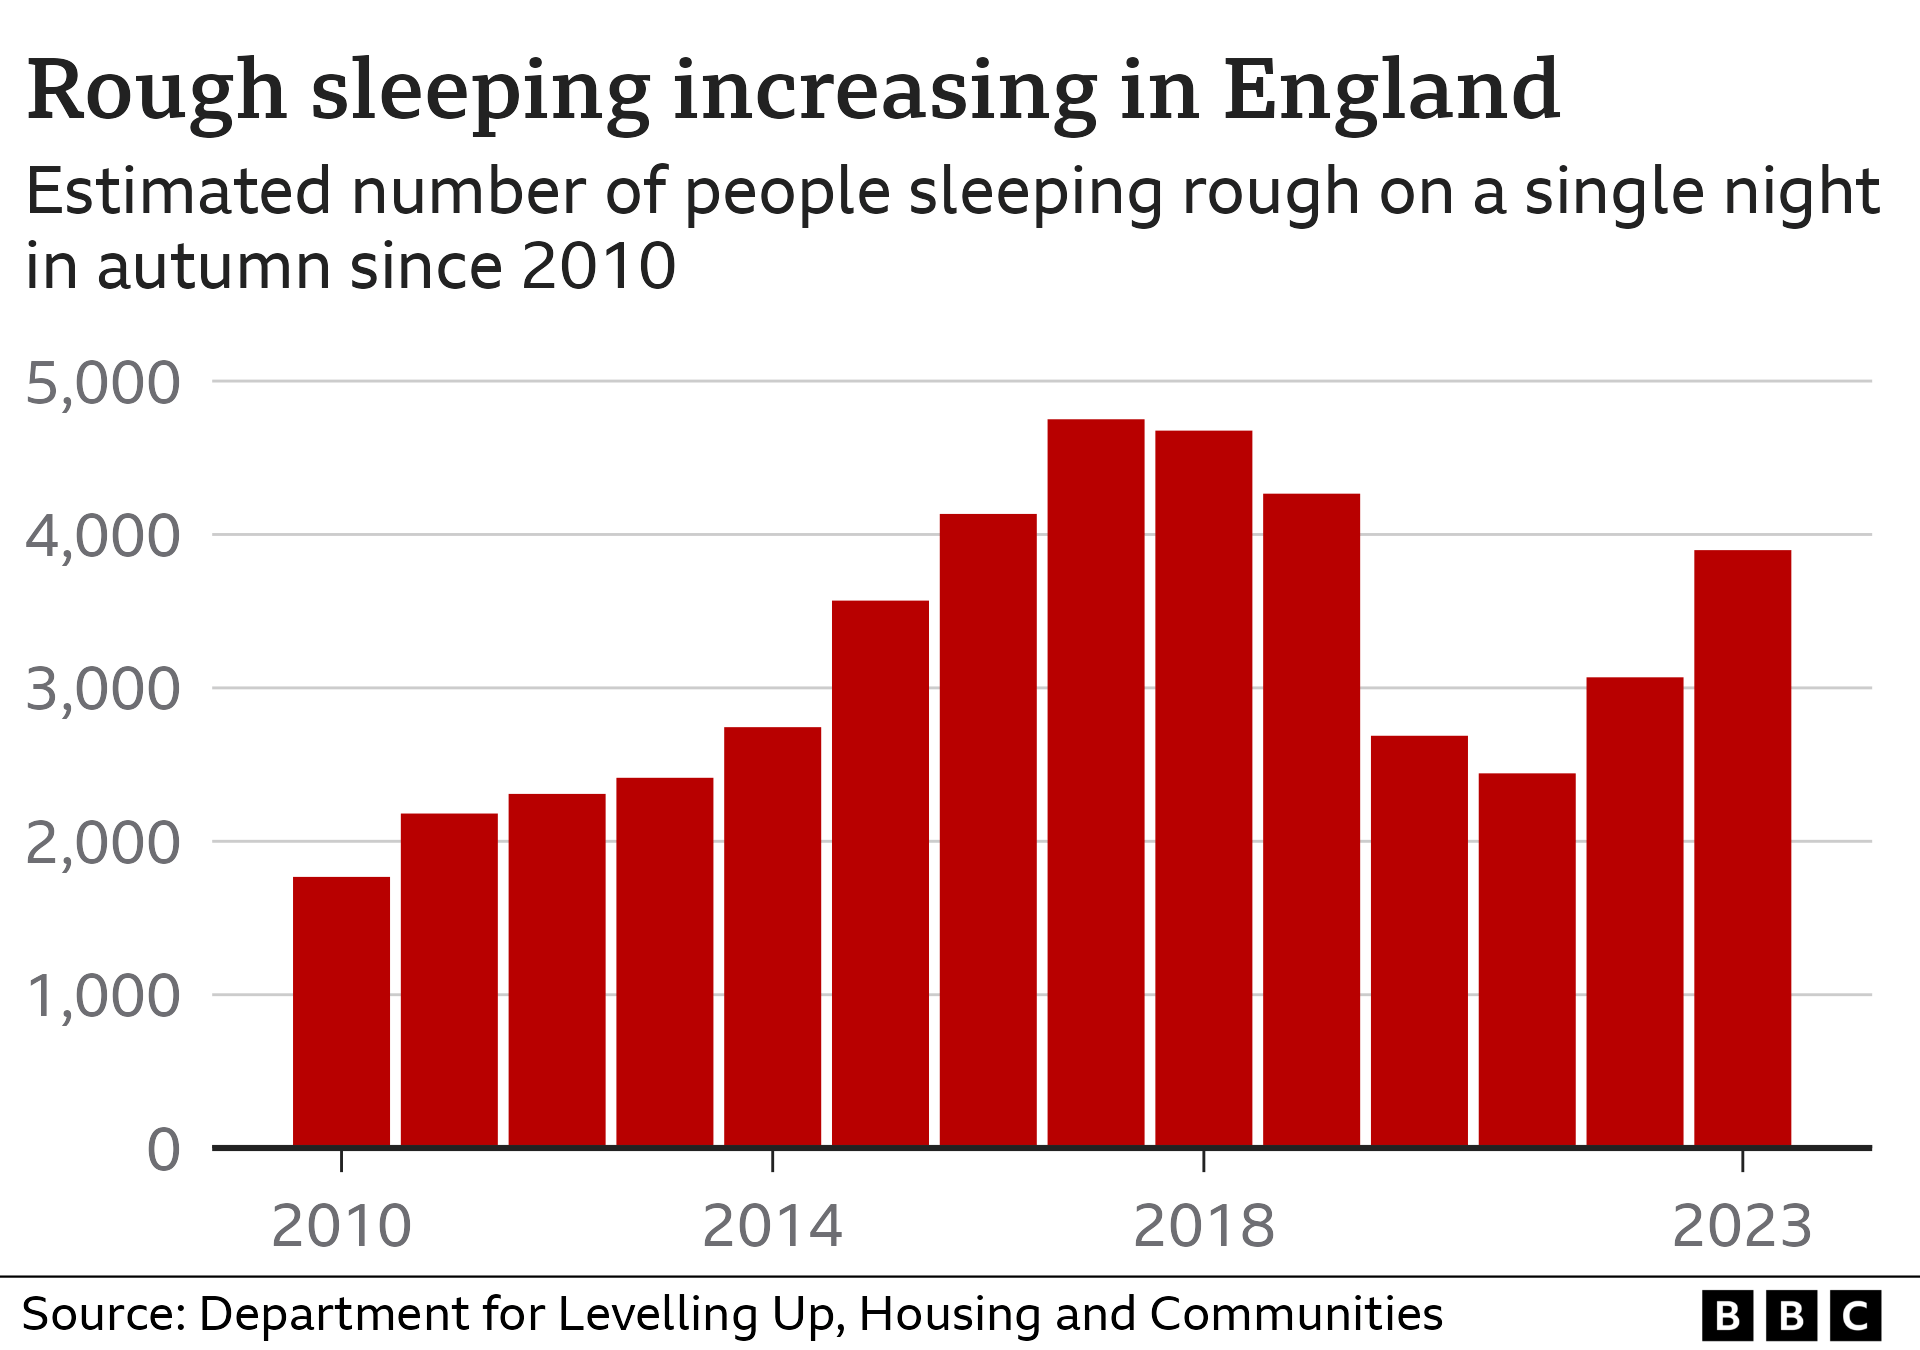 Chart showing how the number of people rough sleeping in England has increased